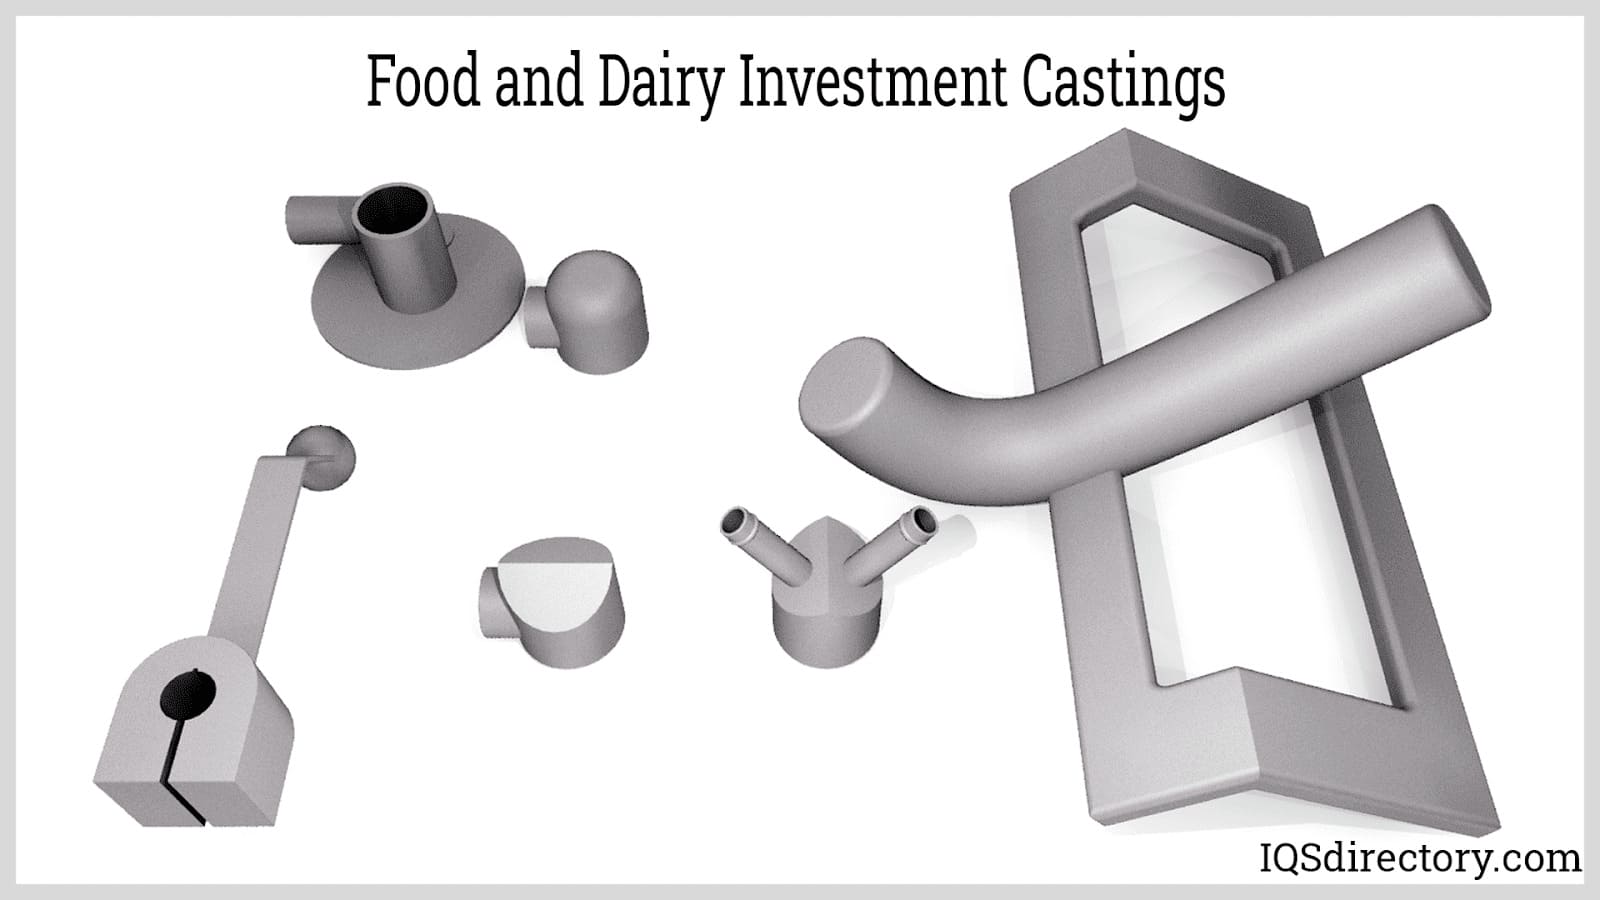 Food and Dairy Investment Castings